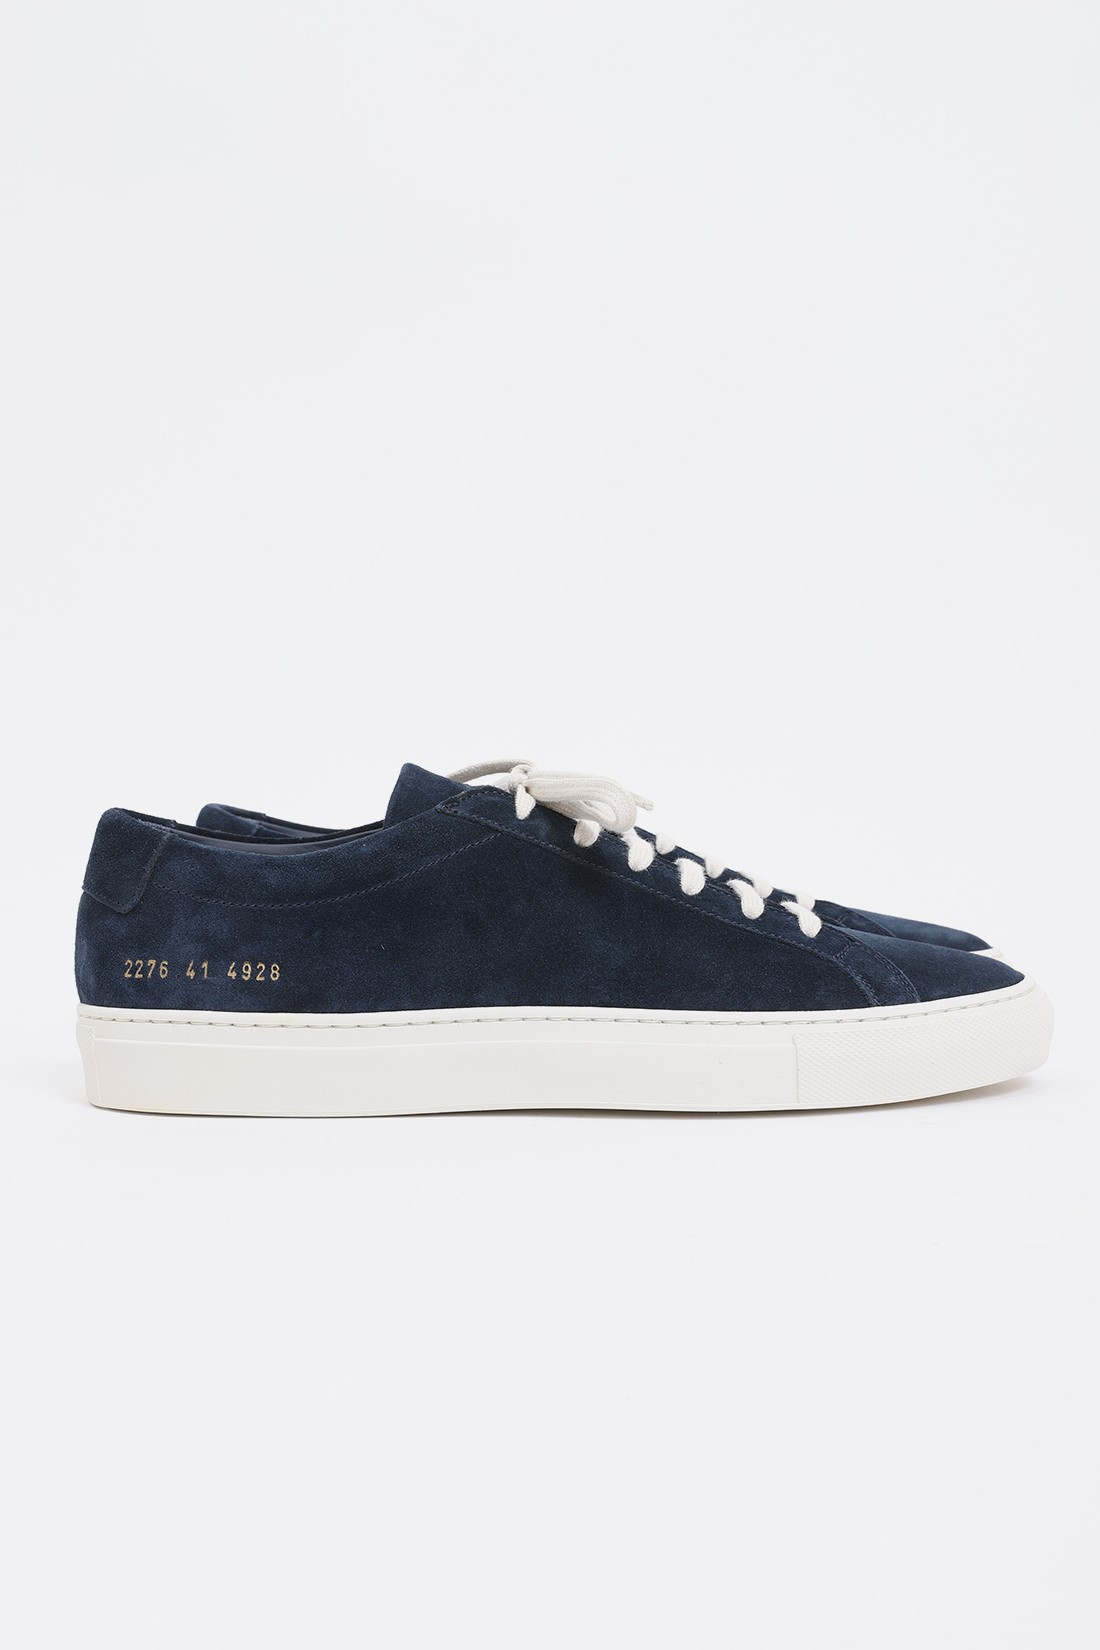 common projects achilles low navy suede